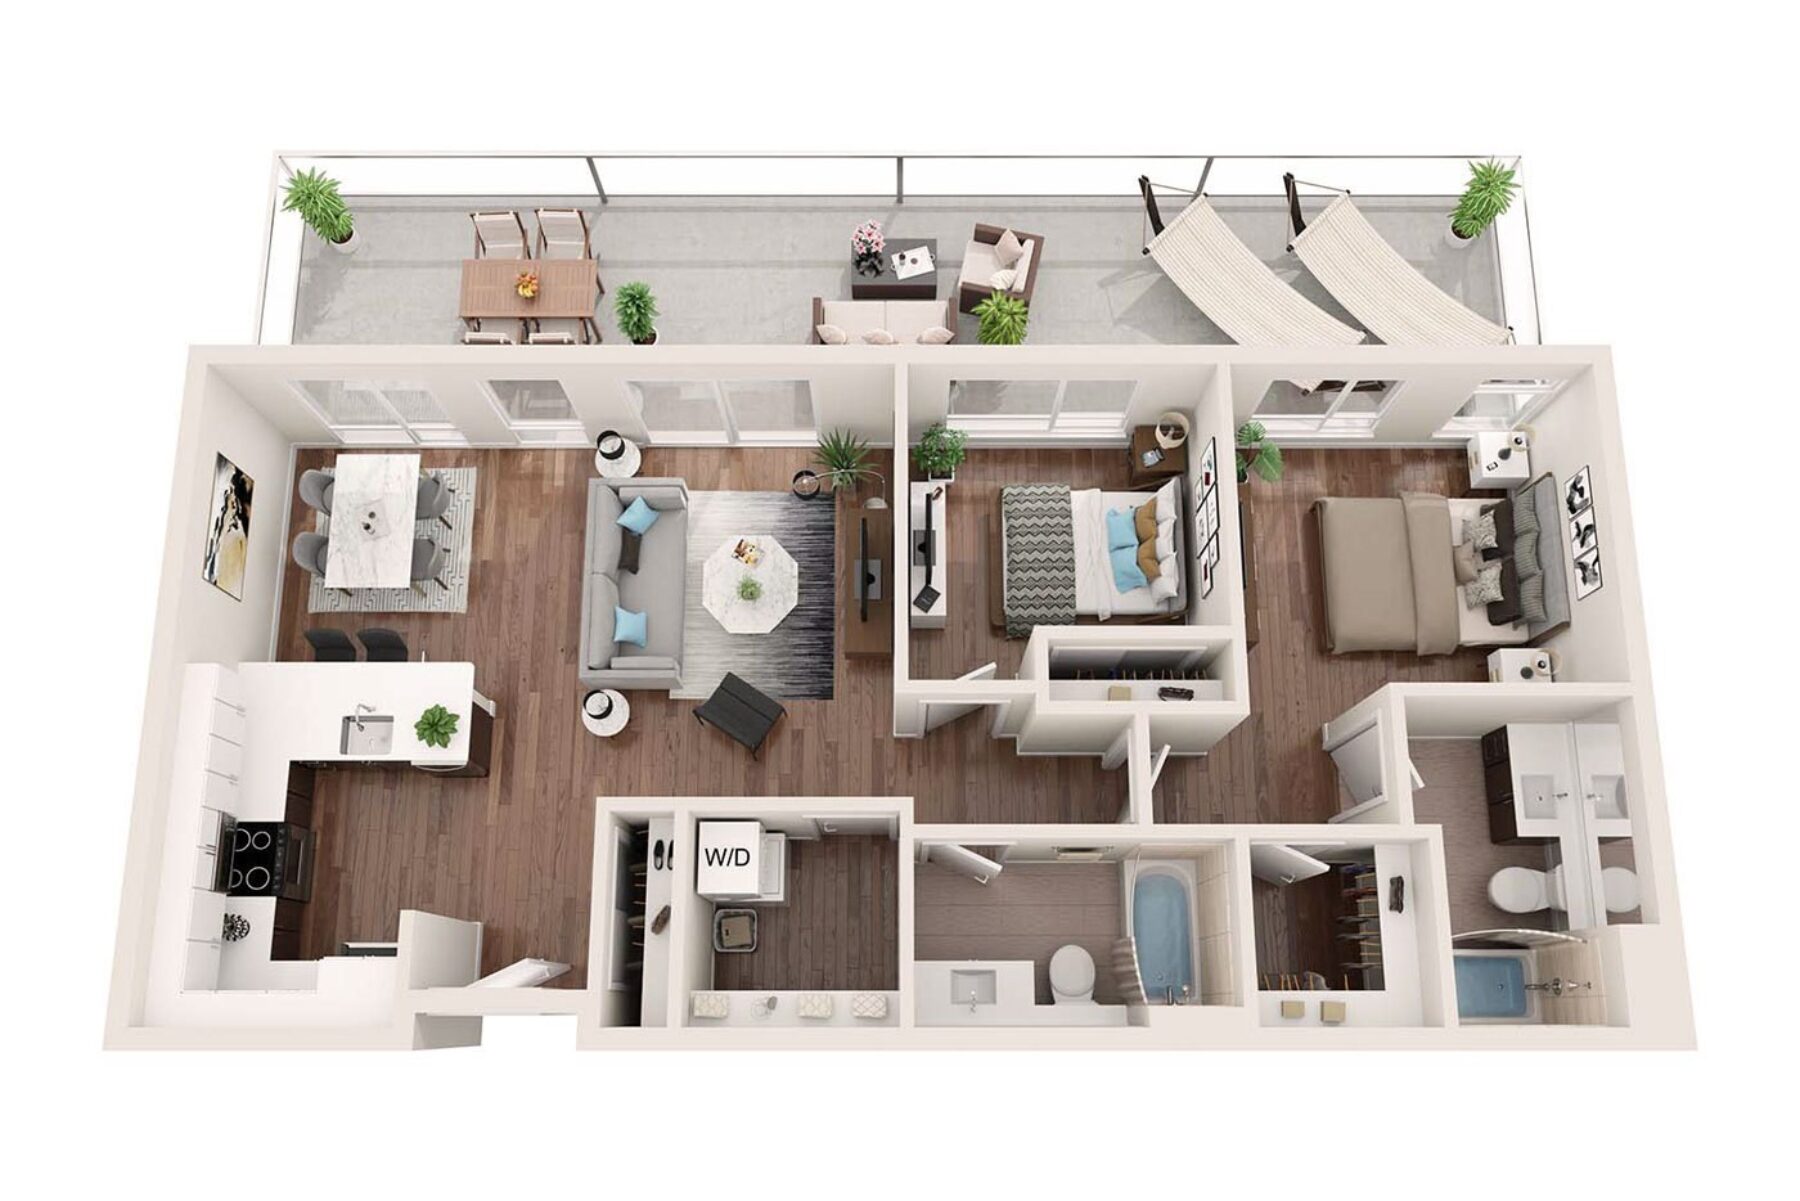 Plan Image: 2.10 - Two Bedroom w/ Private Deck